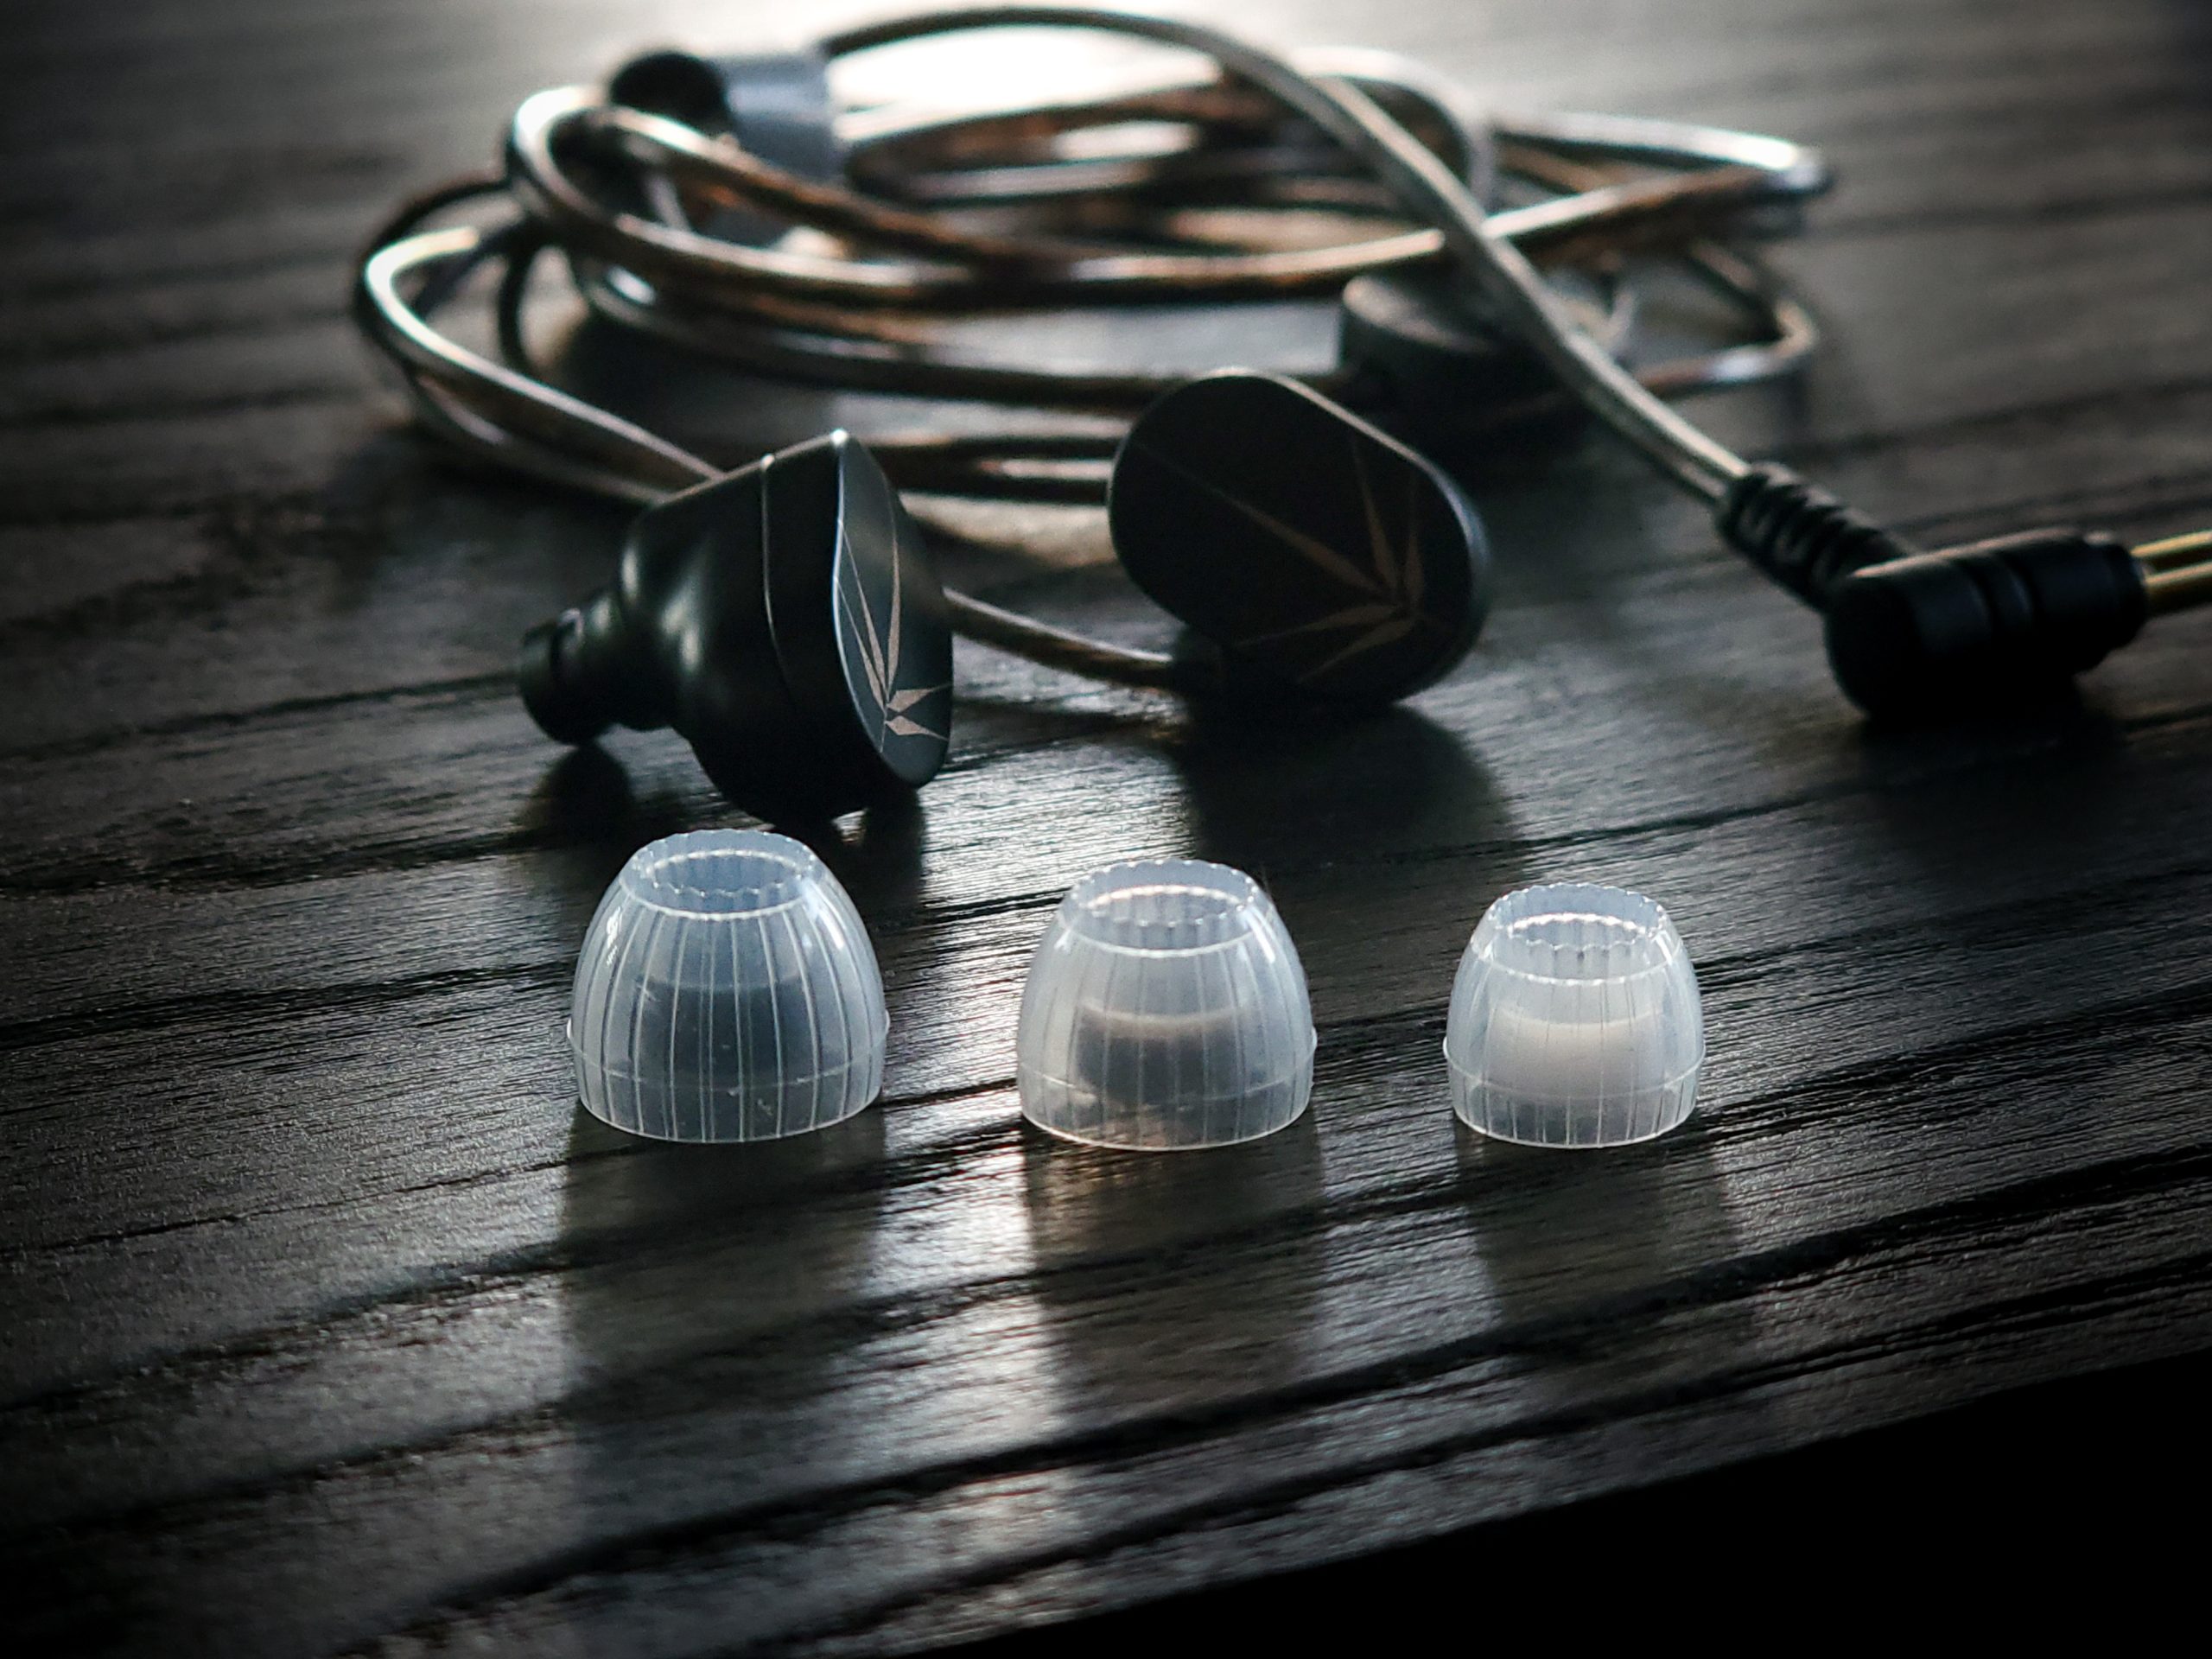 Moondrop Spring Tips for IEMs